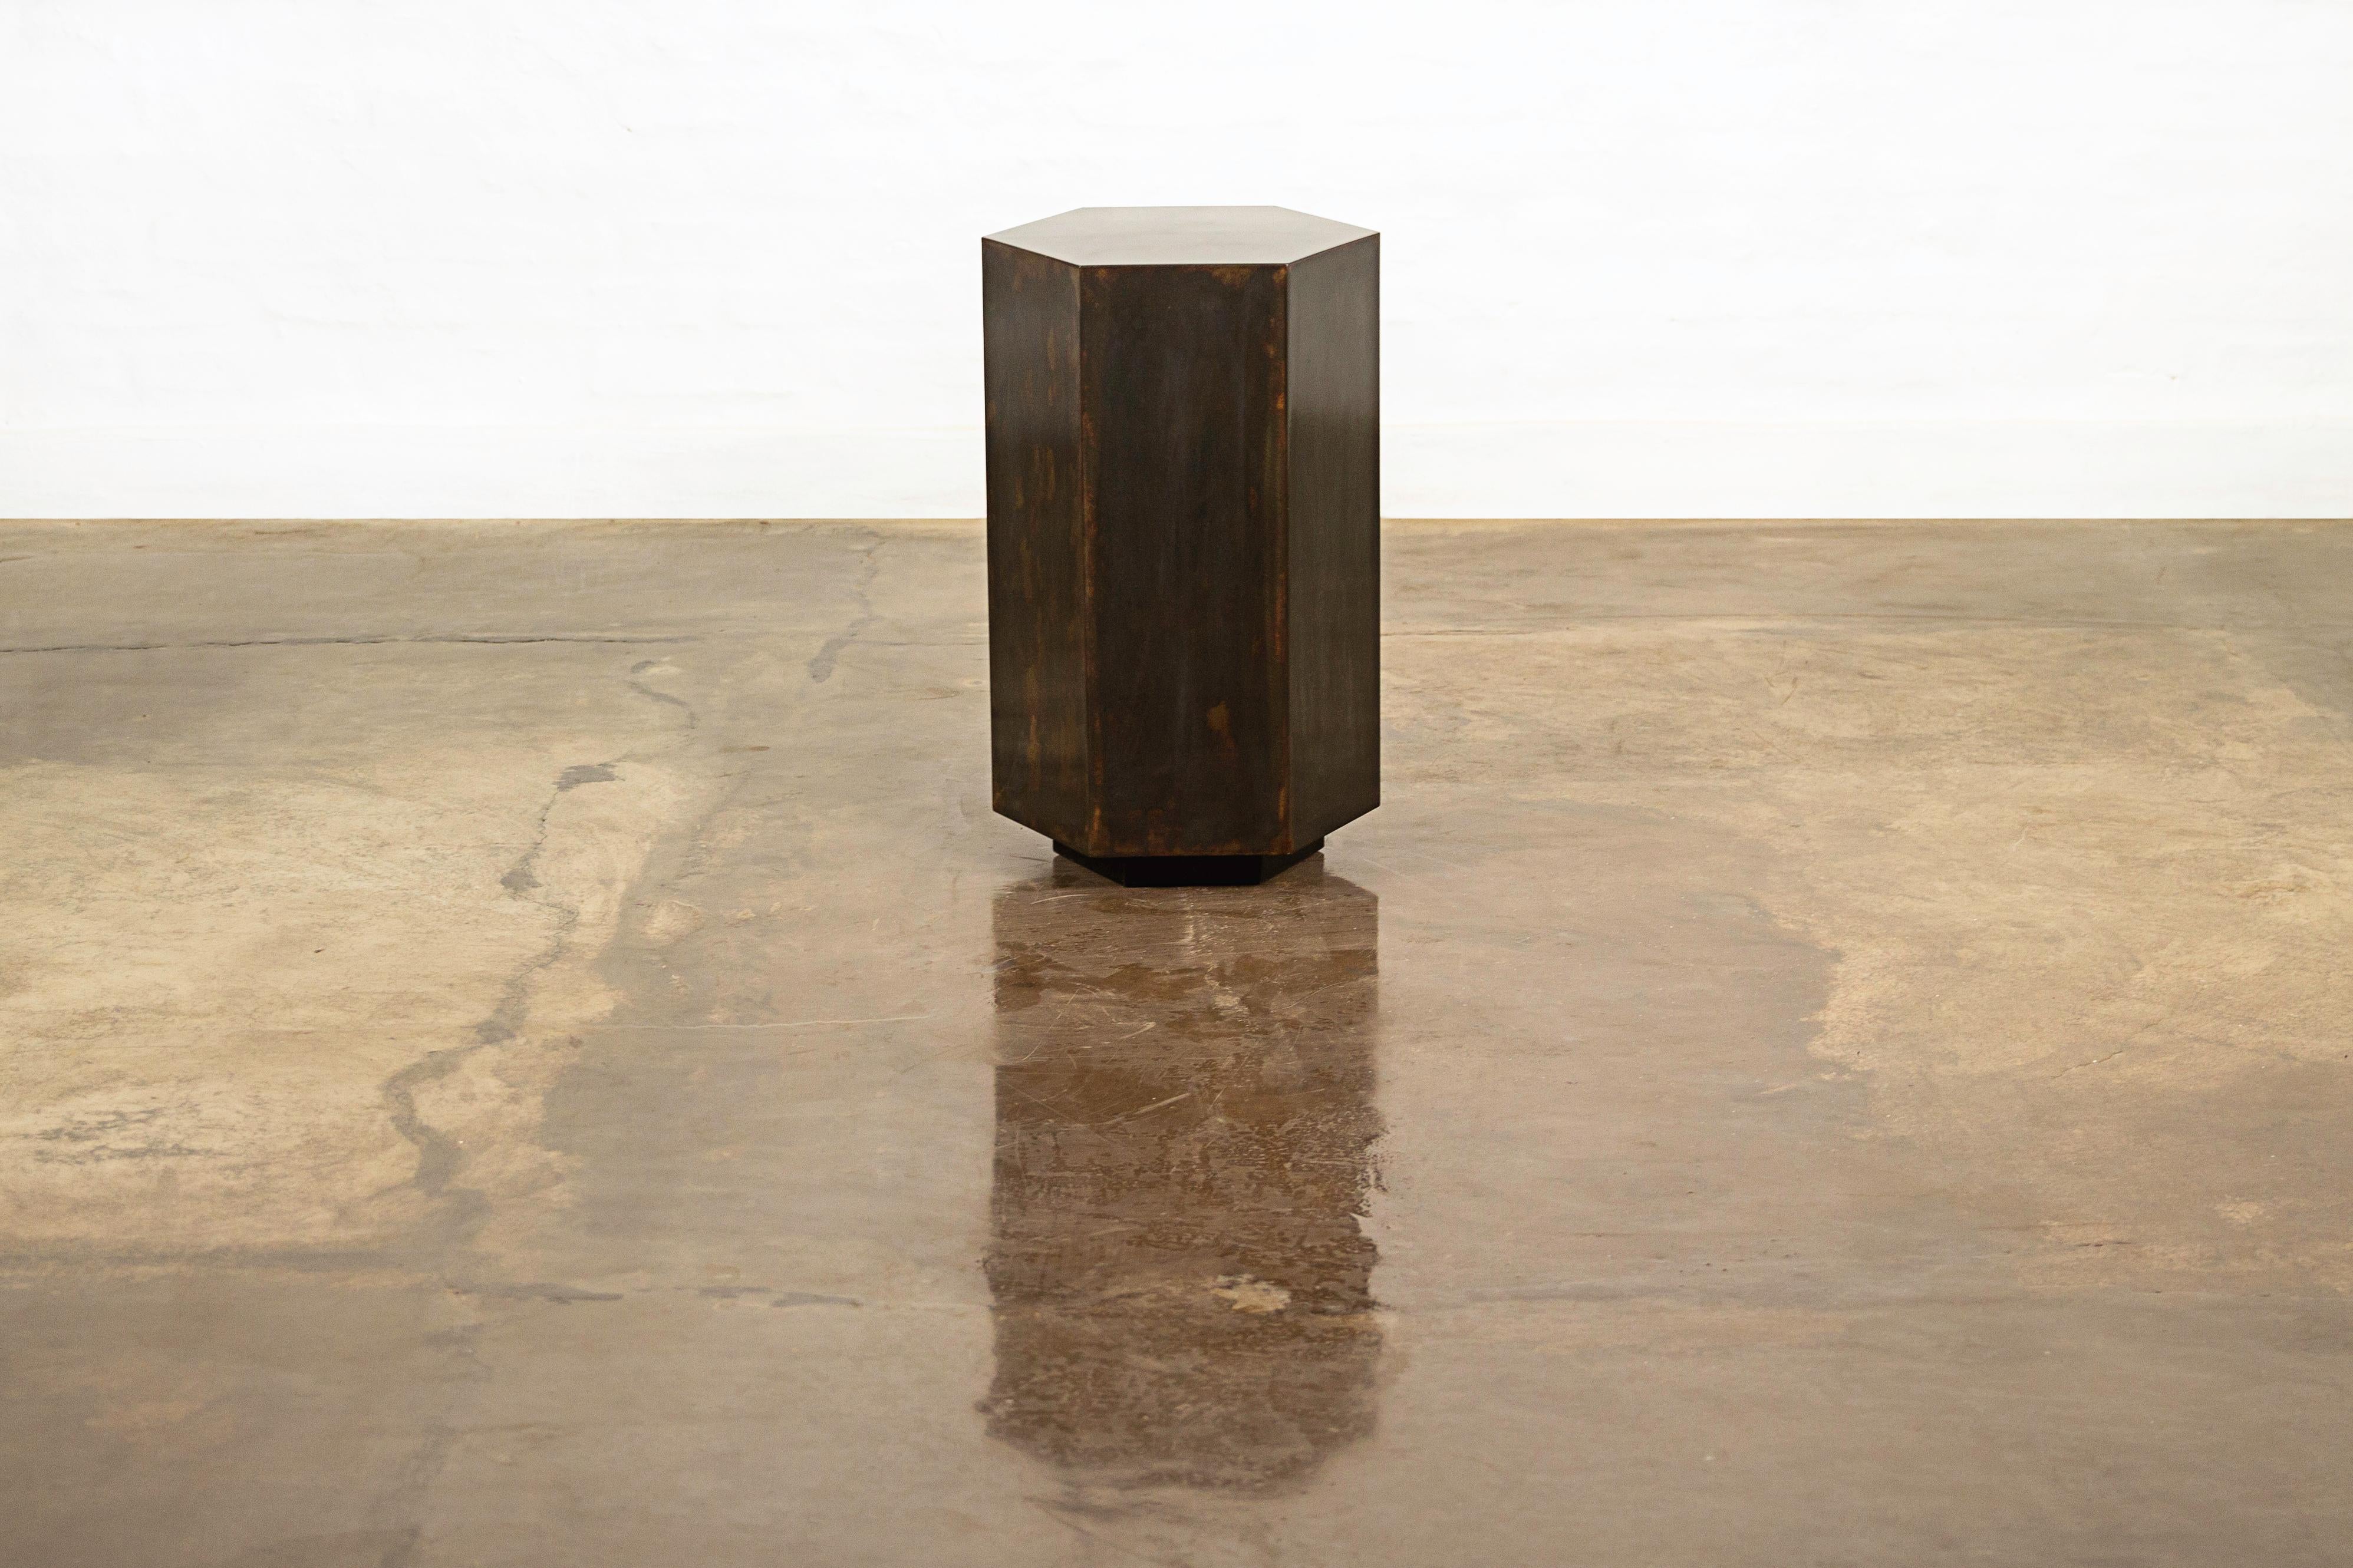 Ettore Hex's name comes from its hexagonal shape and can be specified in any of Costantini’s available materials and finishes. Shown here in patinated steel, this side table feature a modern, geometric shape that allows the subtle variations of the